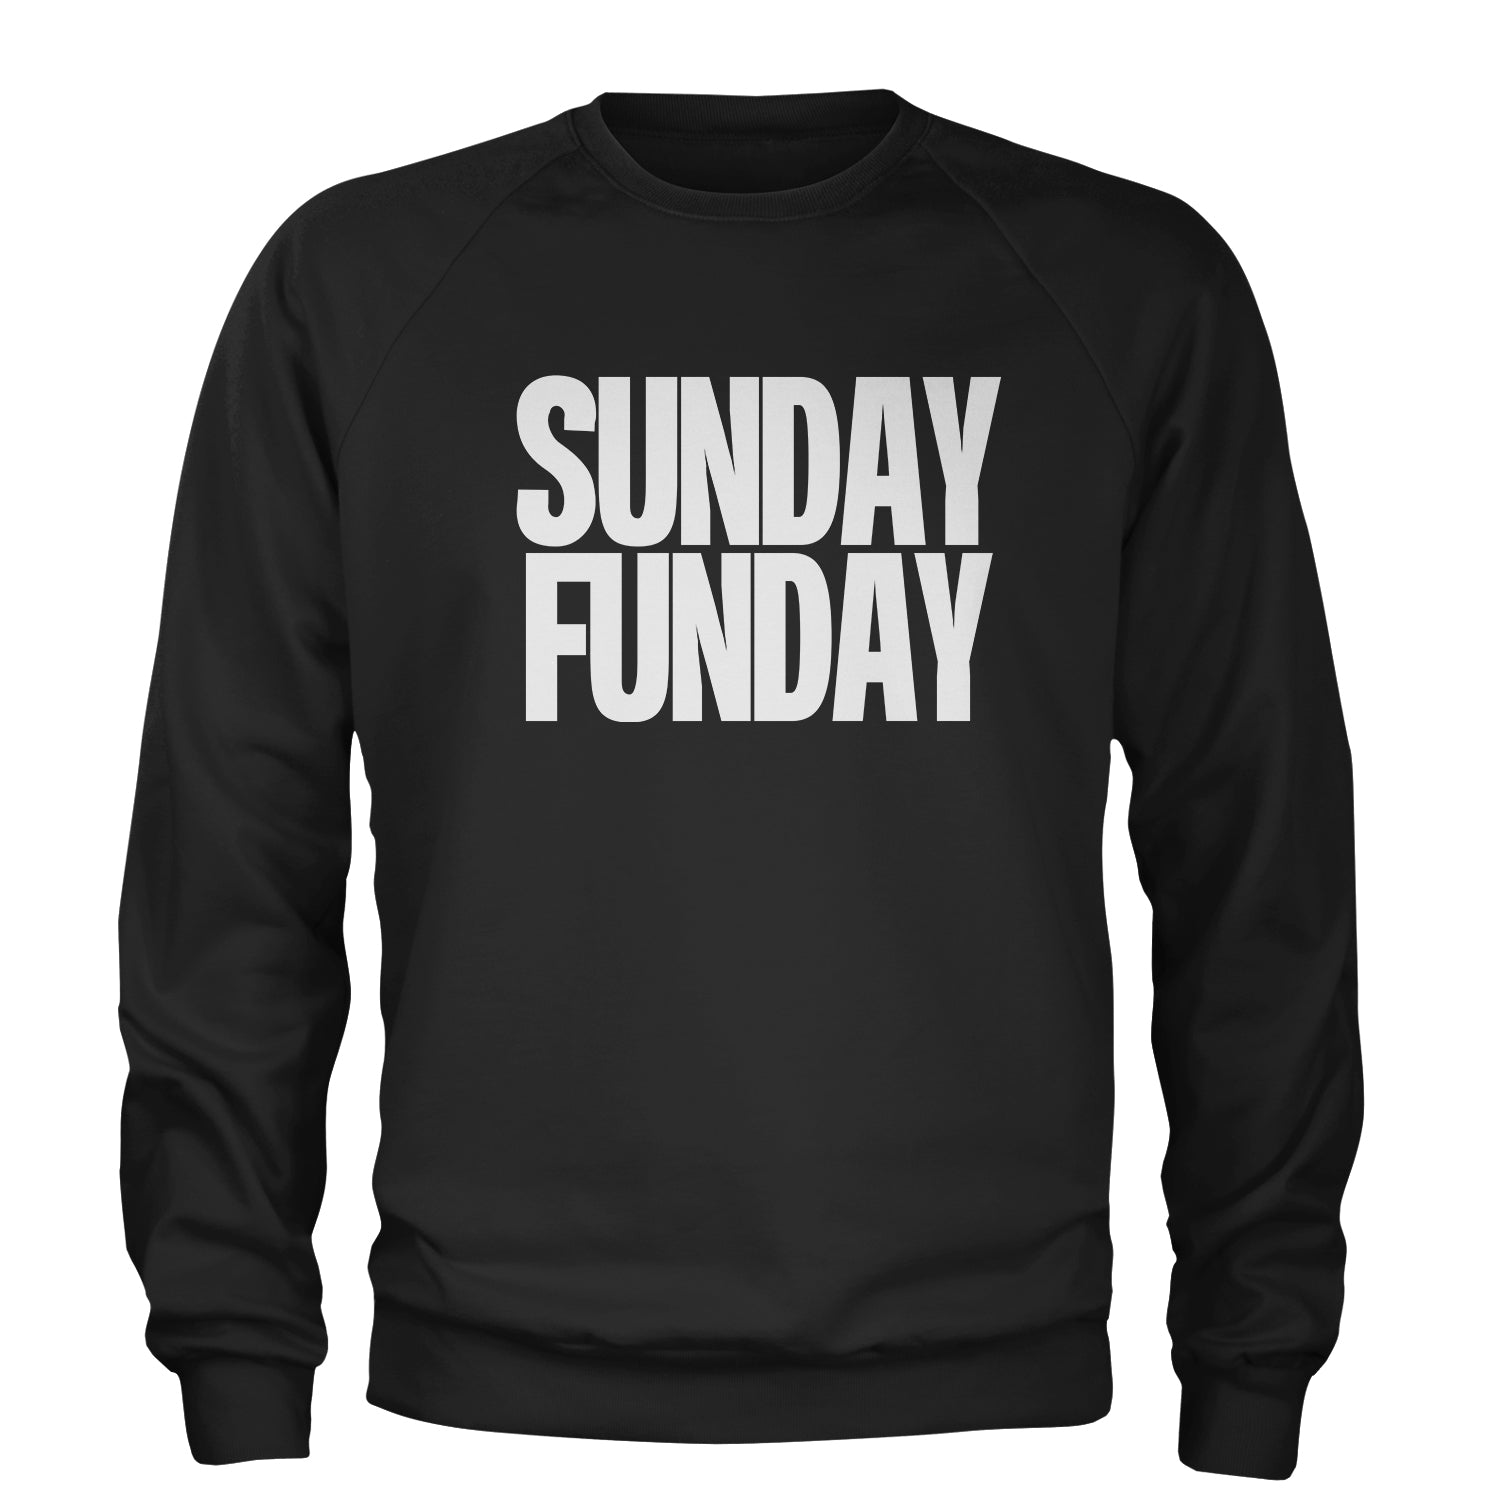 Sunday Funday Adult Crewneck Sweatshirt day, drinking, fun, funday, partying, sun, Sunday by Expression Tees